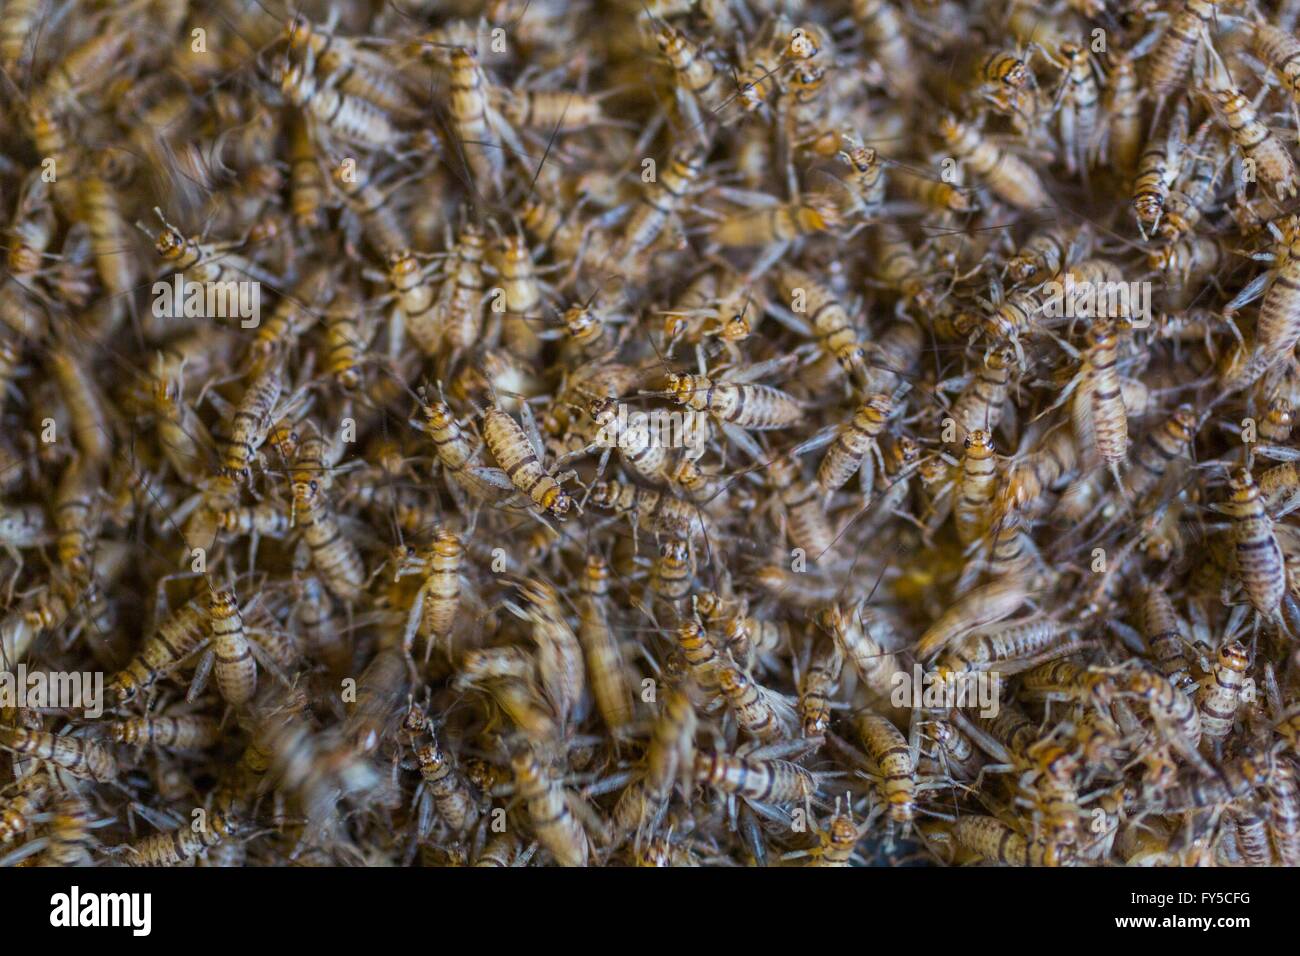 large scale production of edible insects (crickets) in Holland Stock Photo